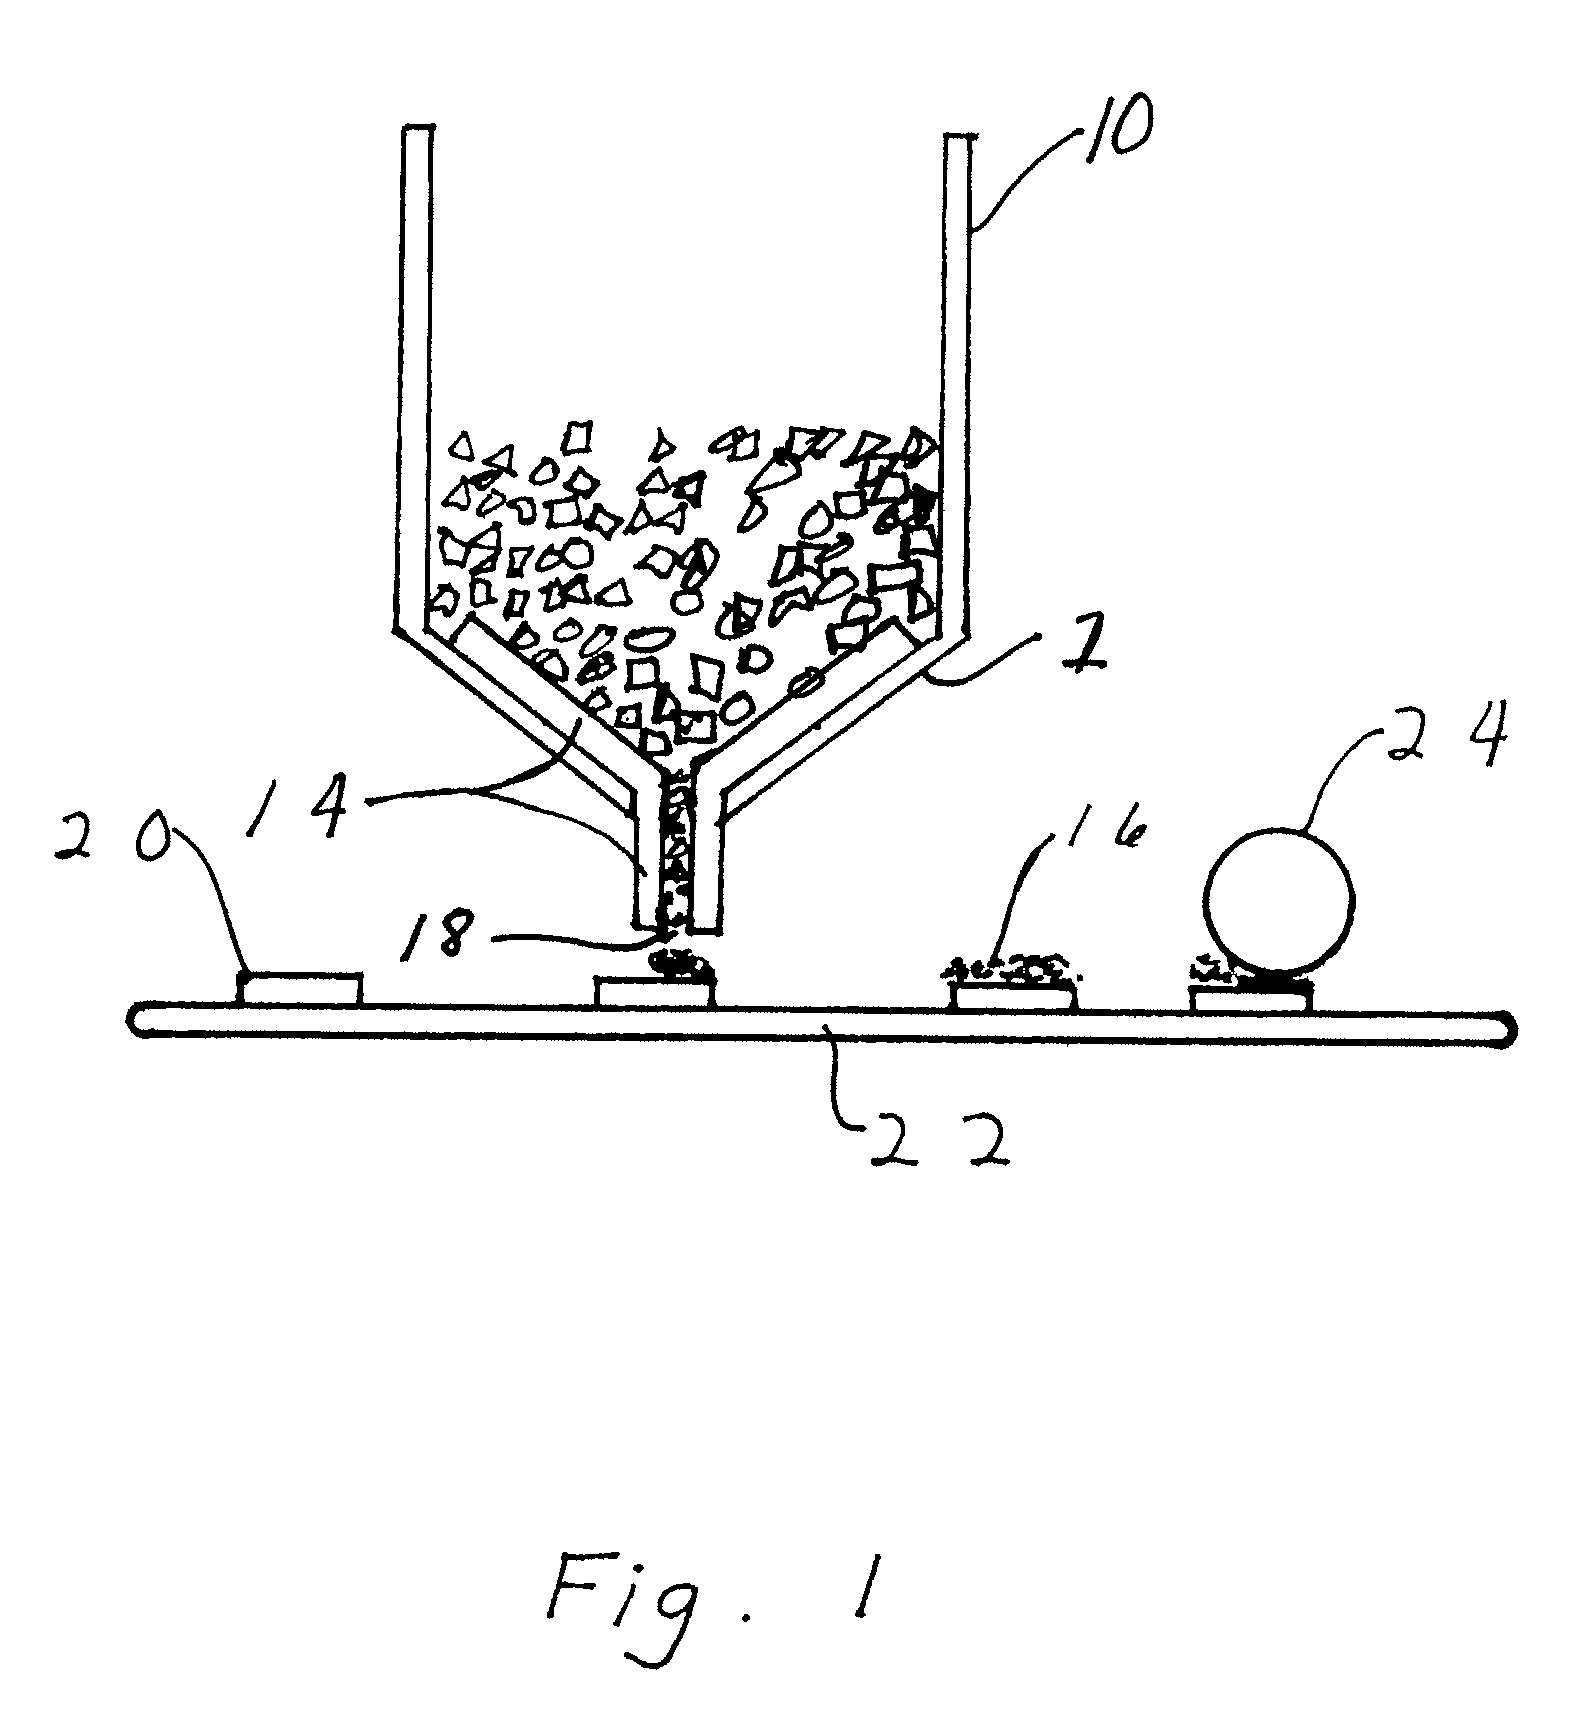 Nut butter compositions and methods related thereto